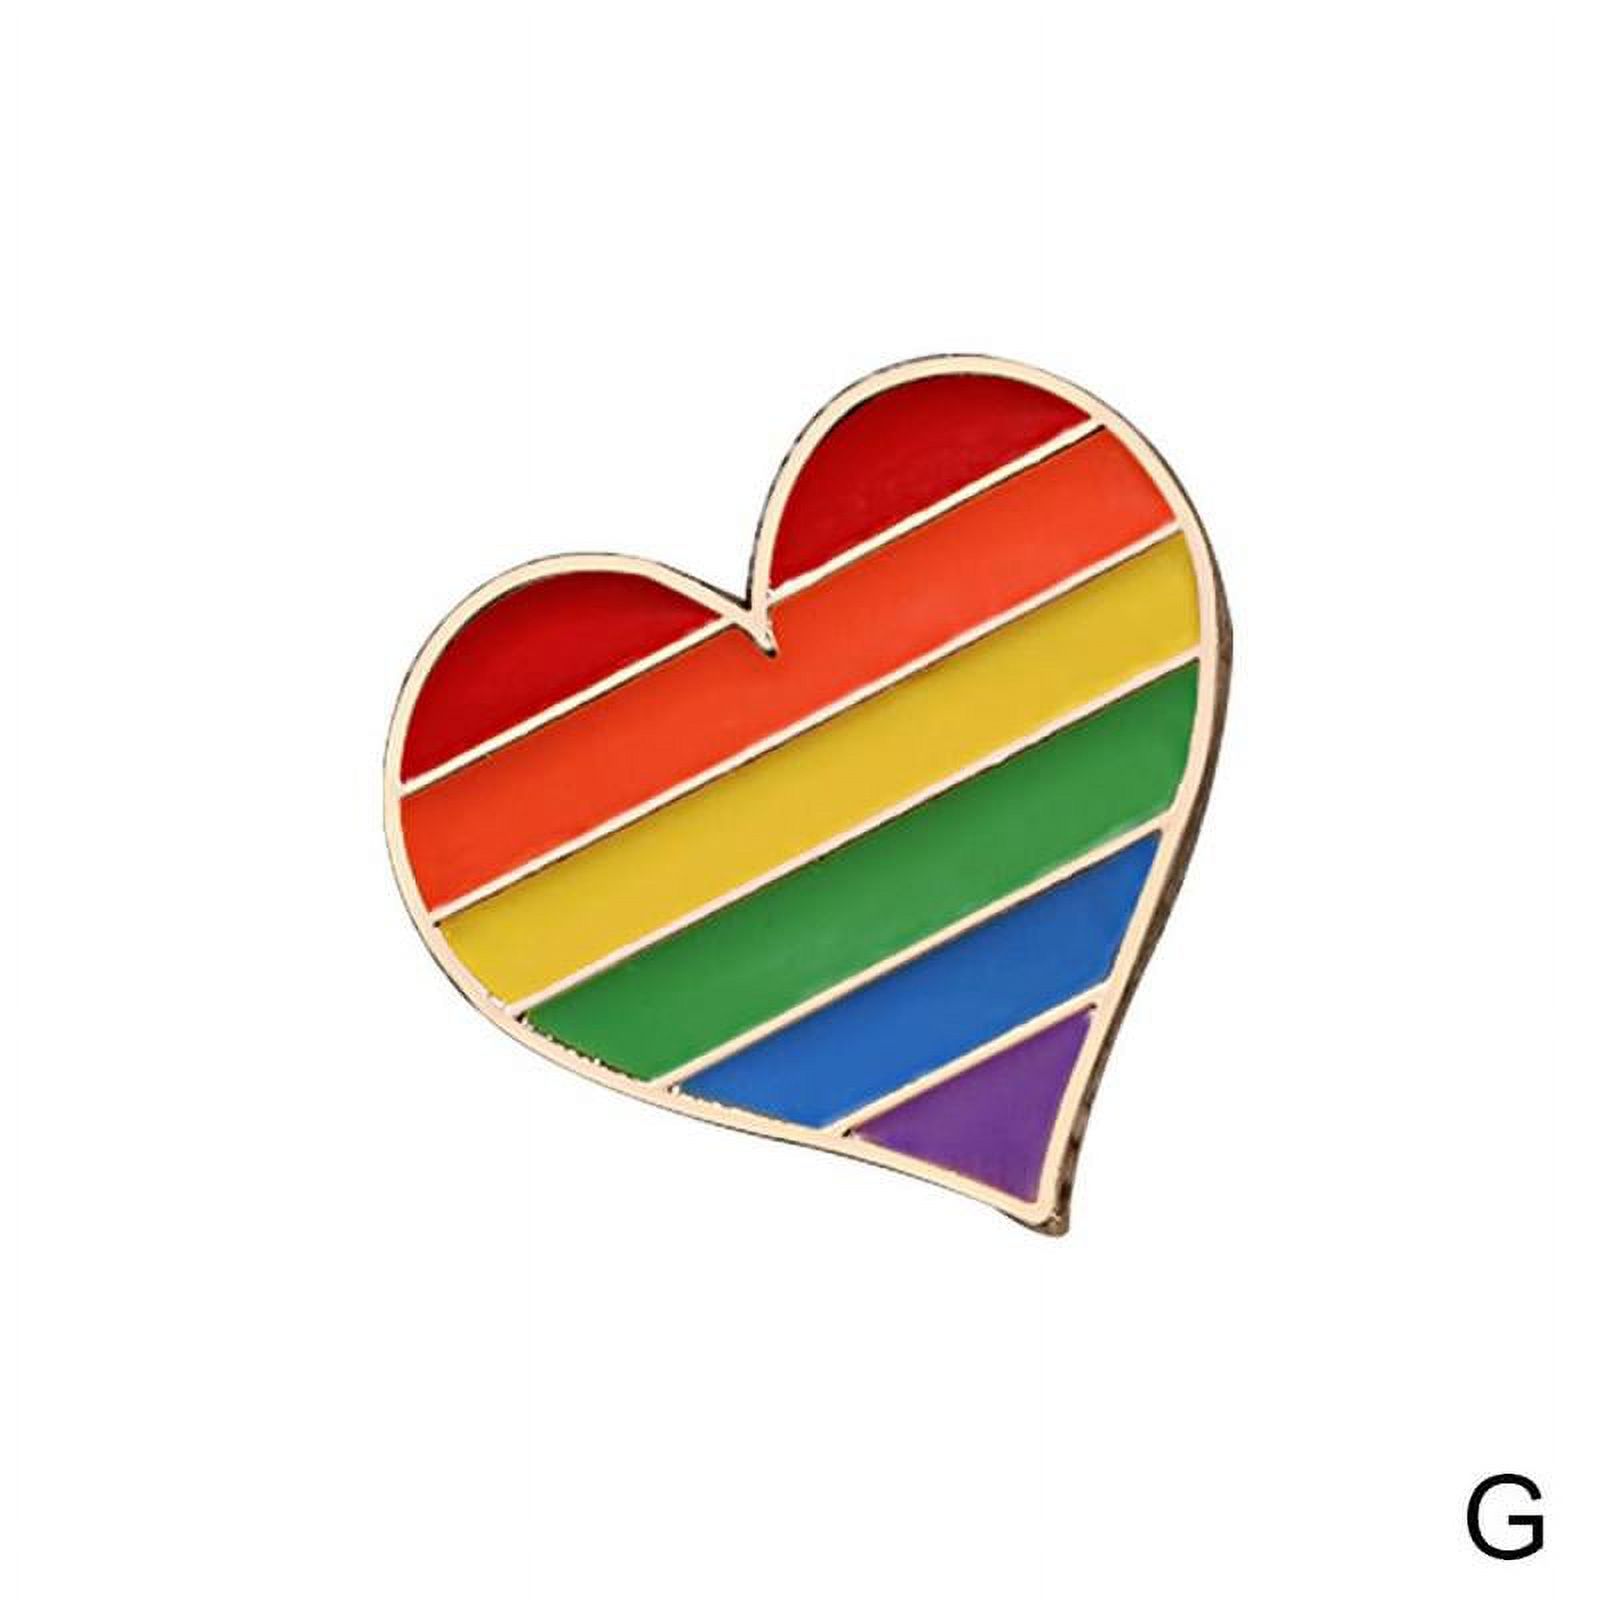 Flag Rainbow Heart Brooch Peace And Love Enamel Pins Clothes Bag Lapel Pin Pride Icon Badge Unisex Jewelry Gift J8Q2 - image 1 of 1